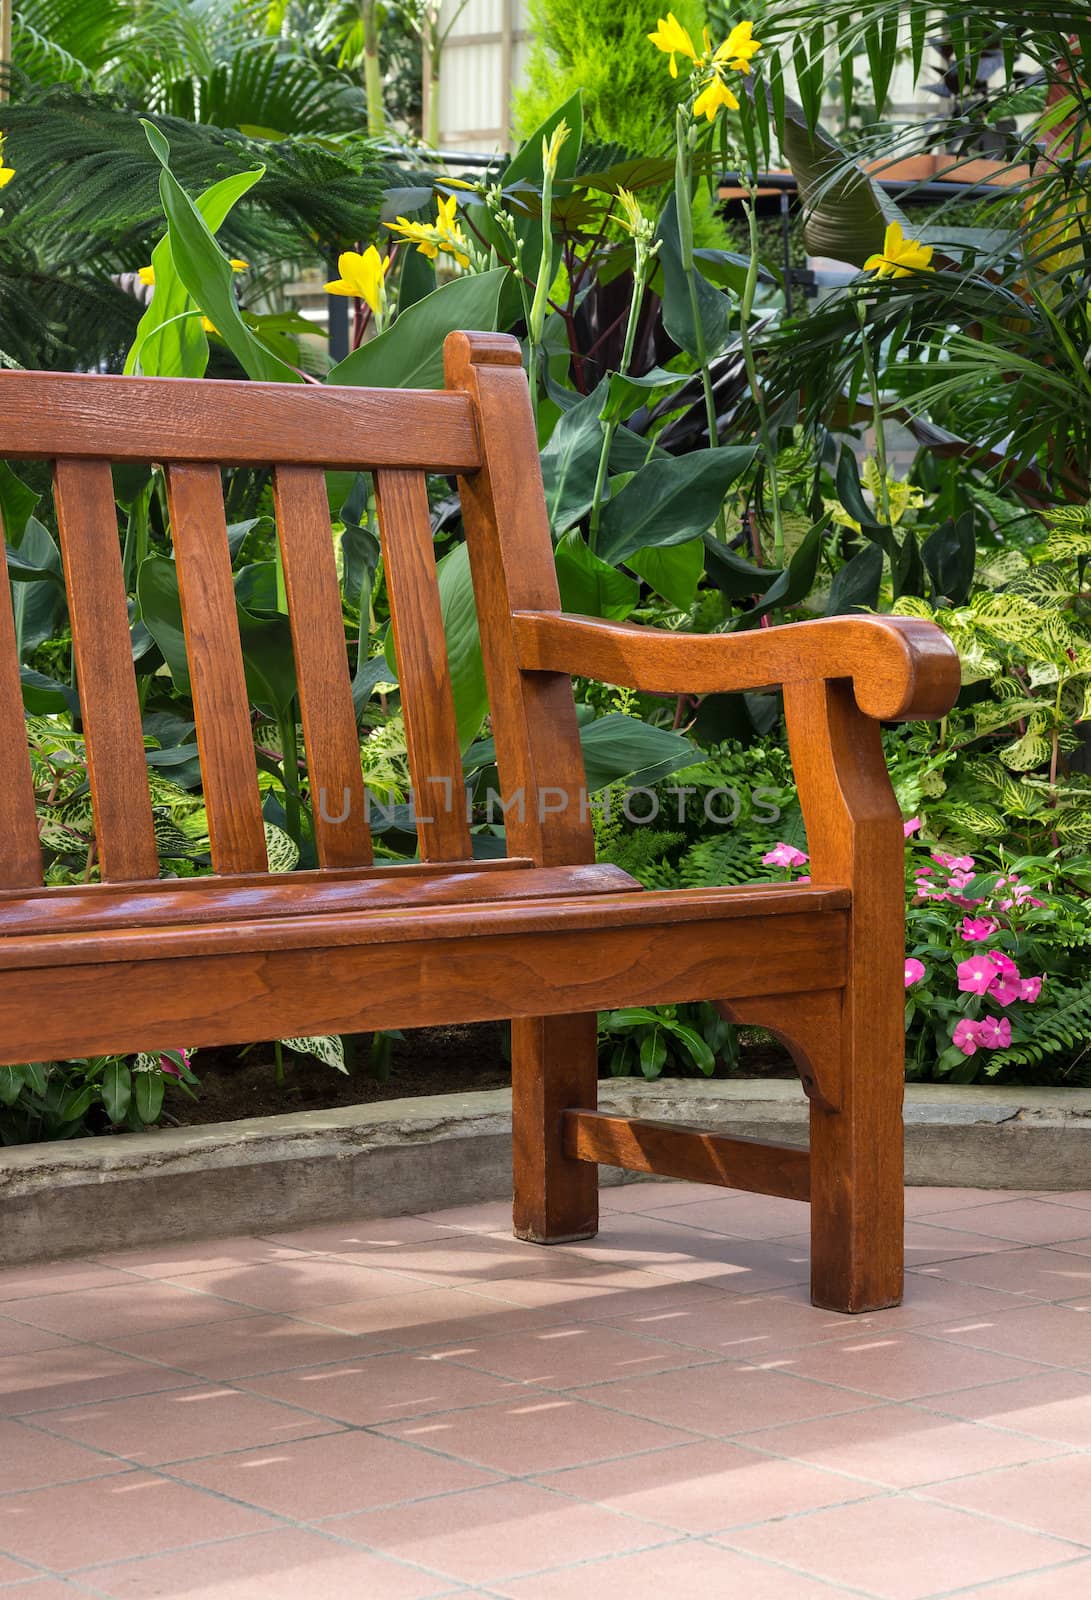 Wooden bench in the tropical sunny garden.